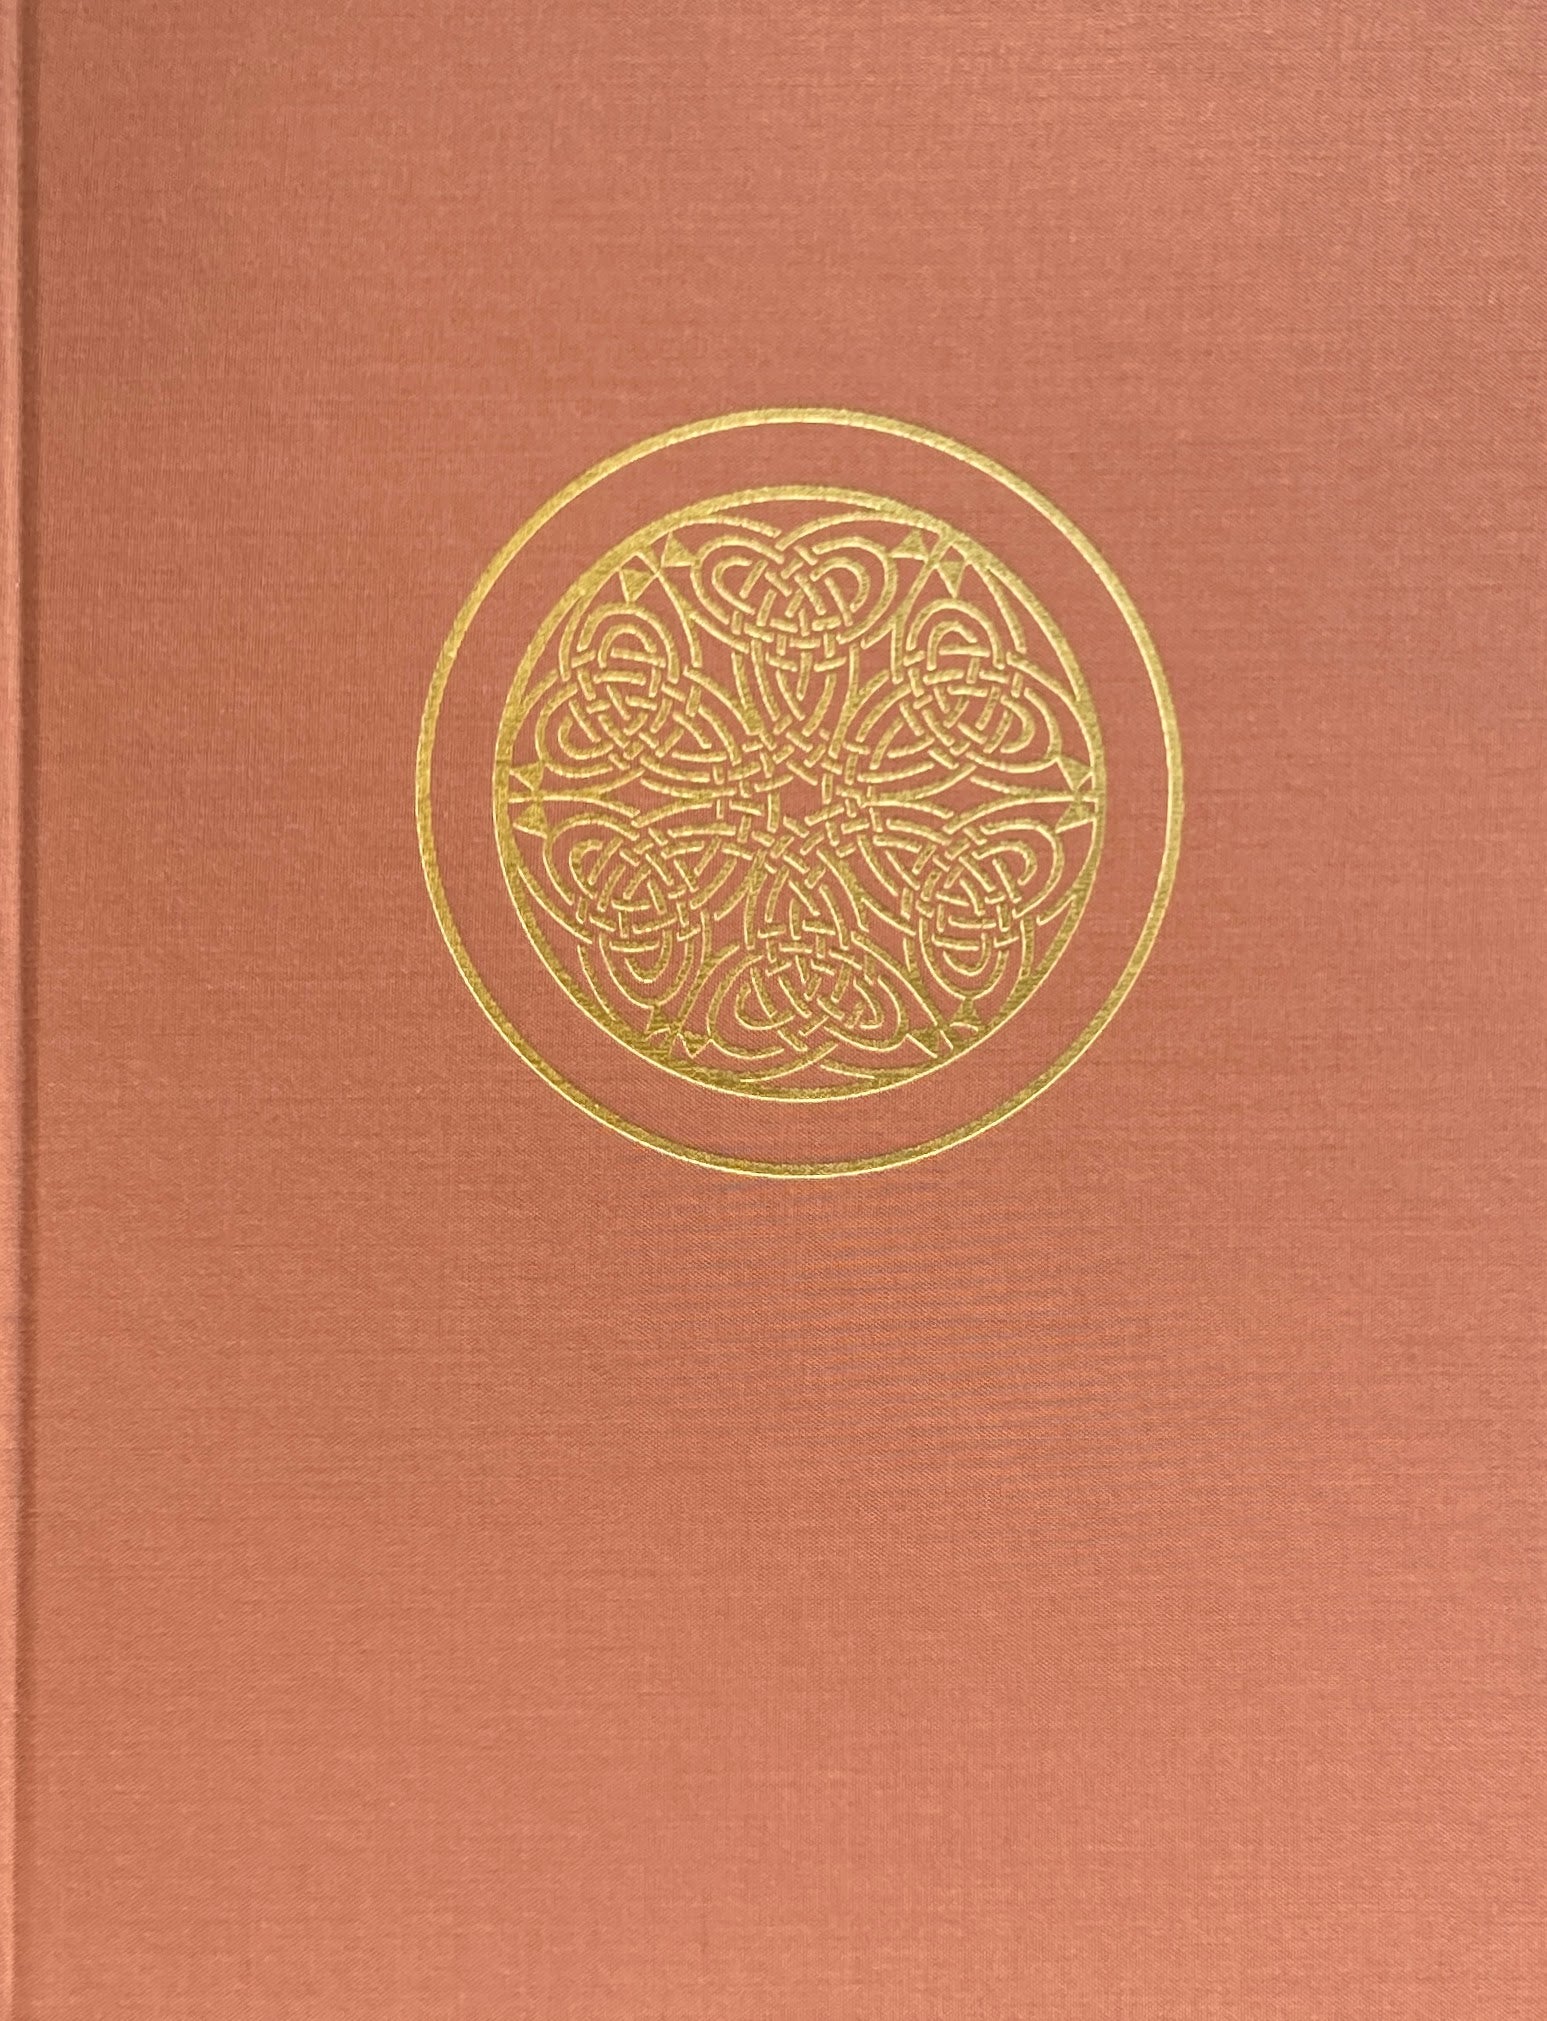 The Book of Kells ケルズの書 – smokebooks shop